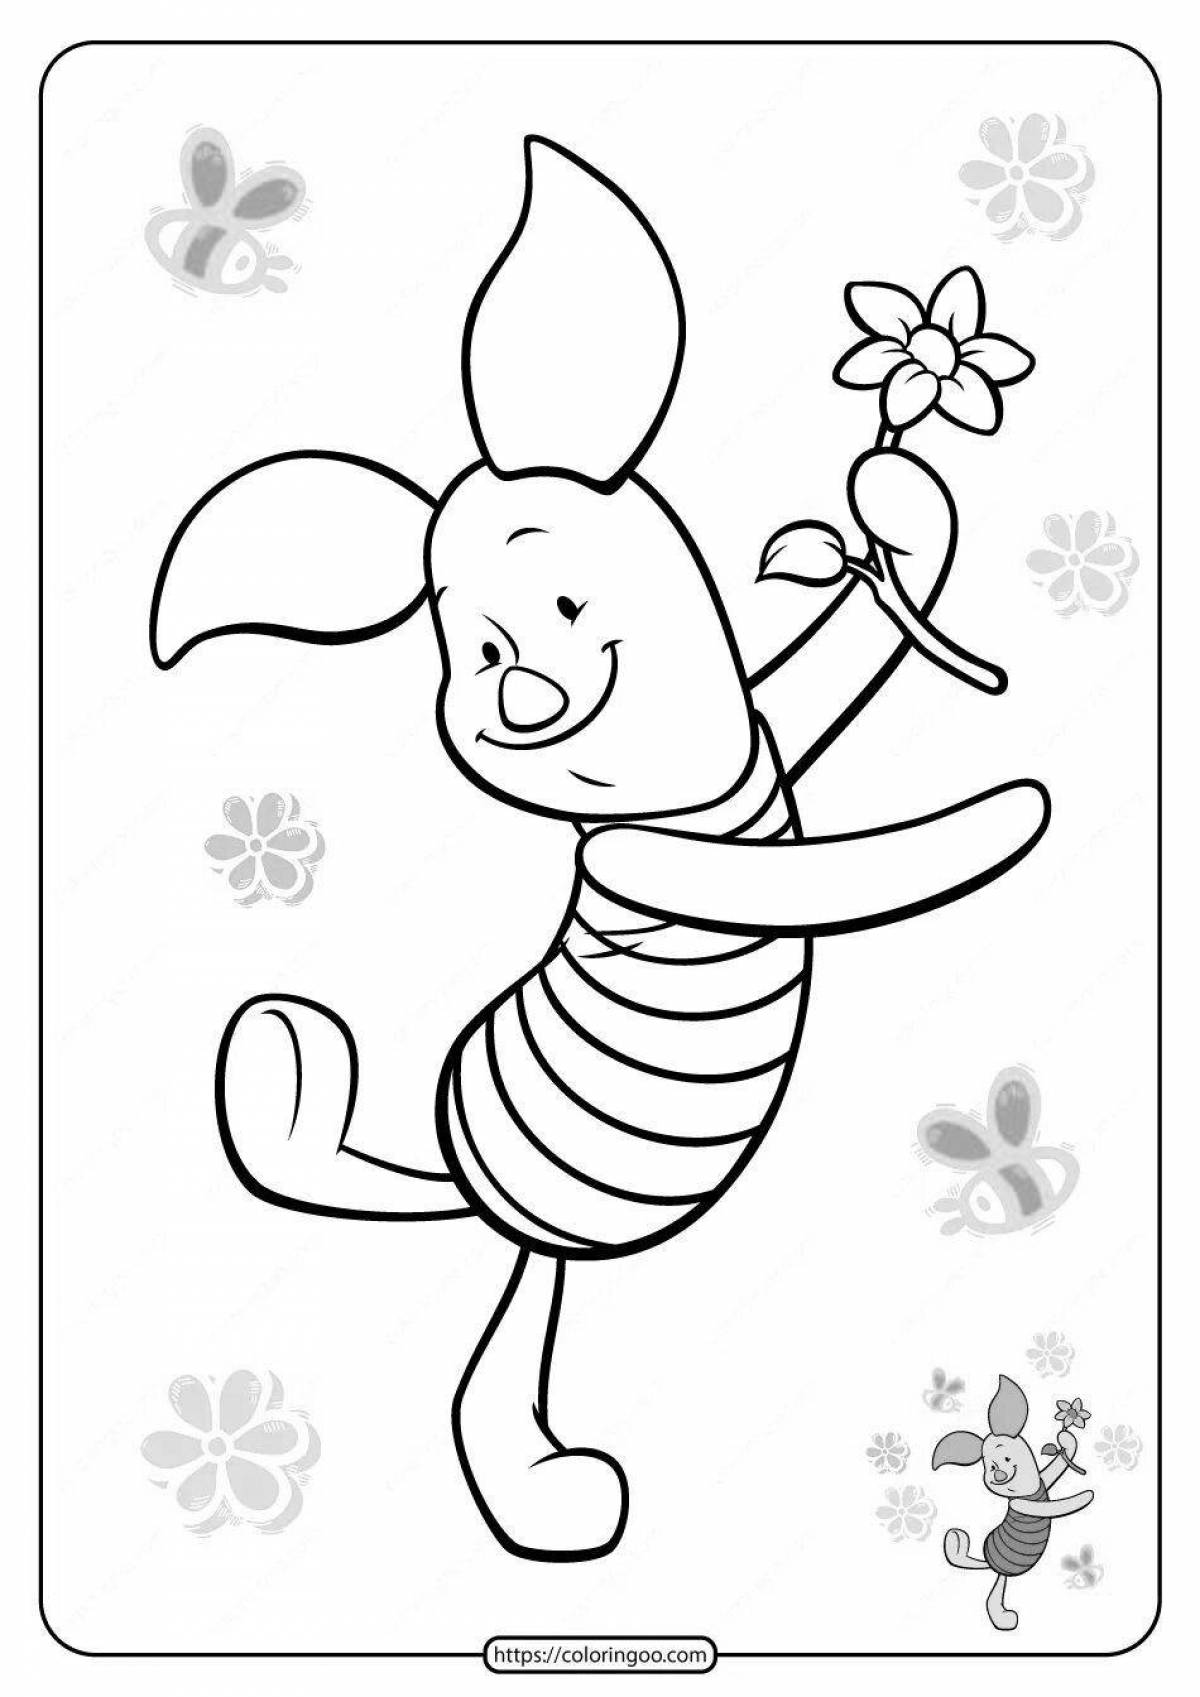 Innovative cartoon coloring book for 3-4 year olds